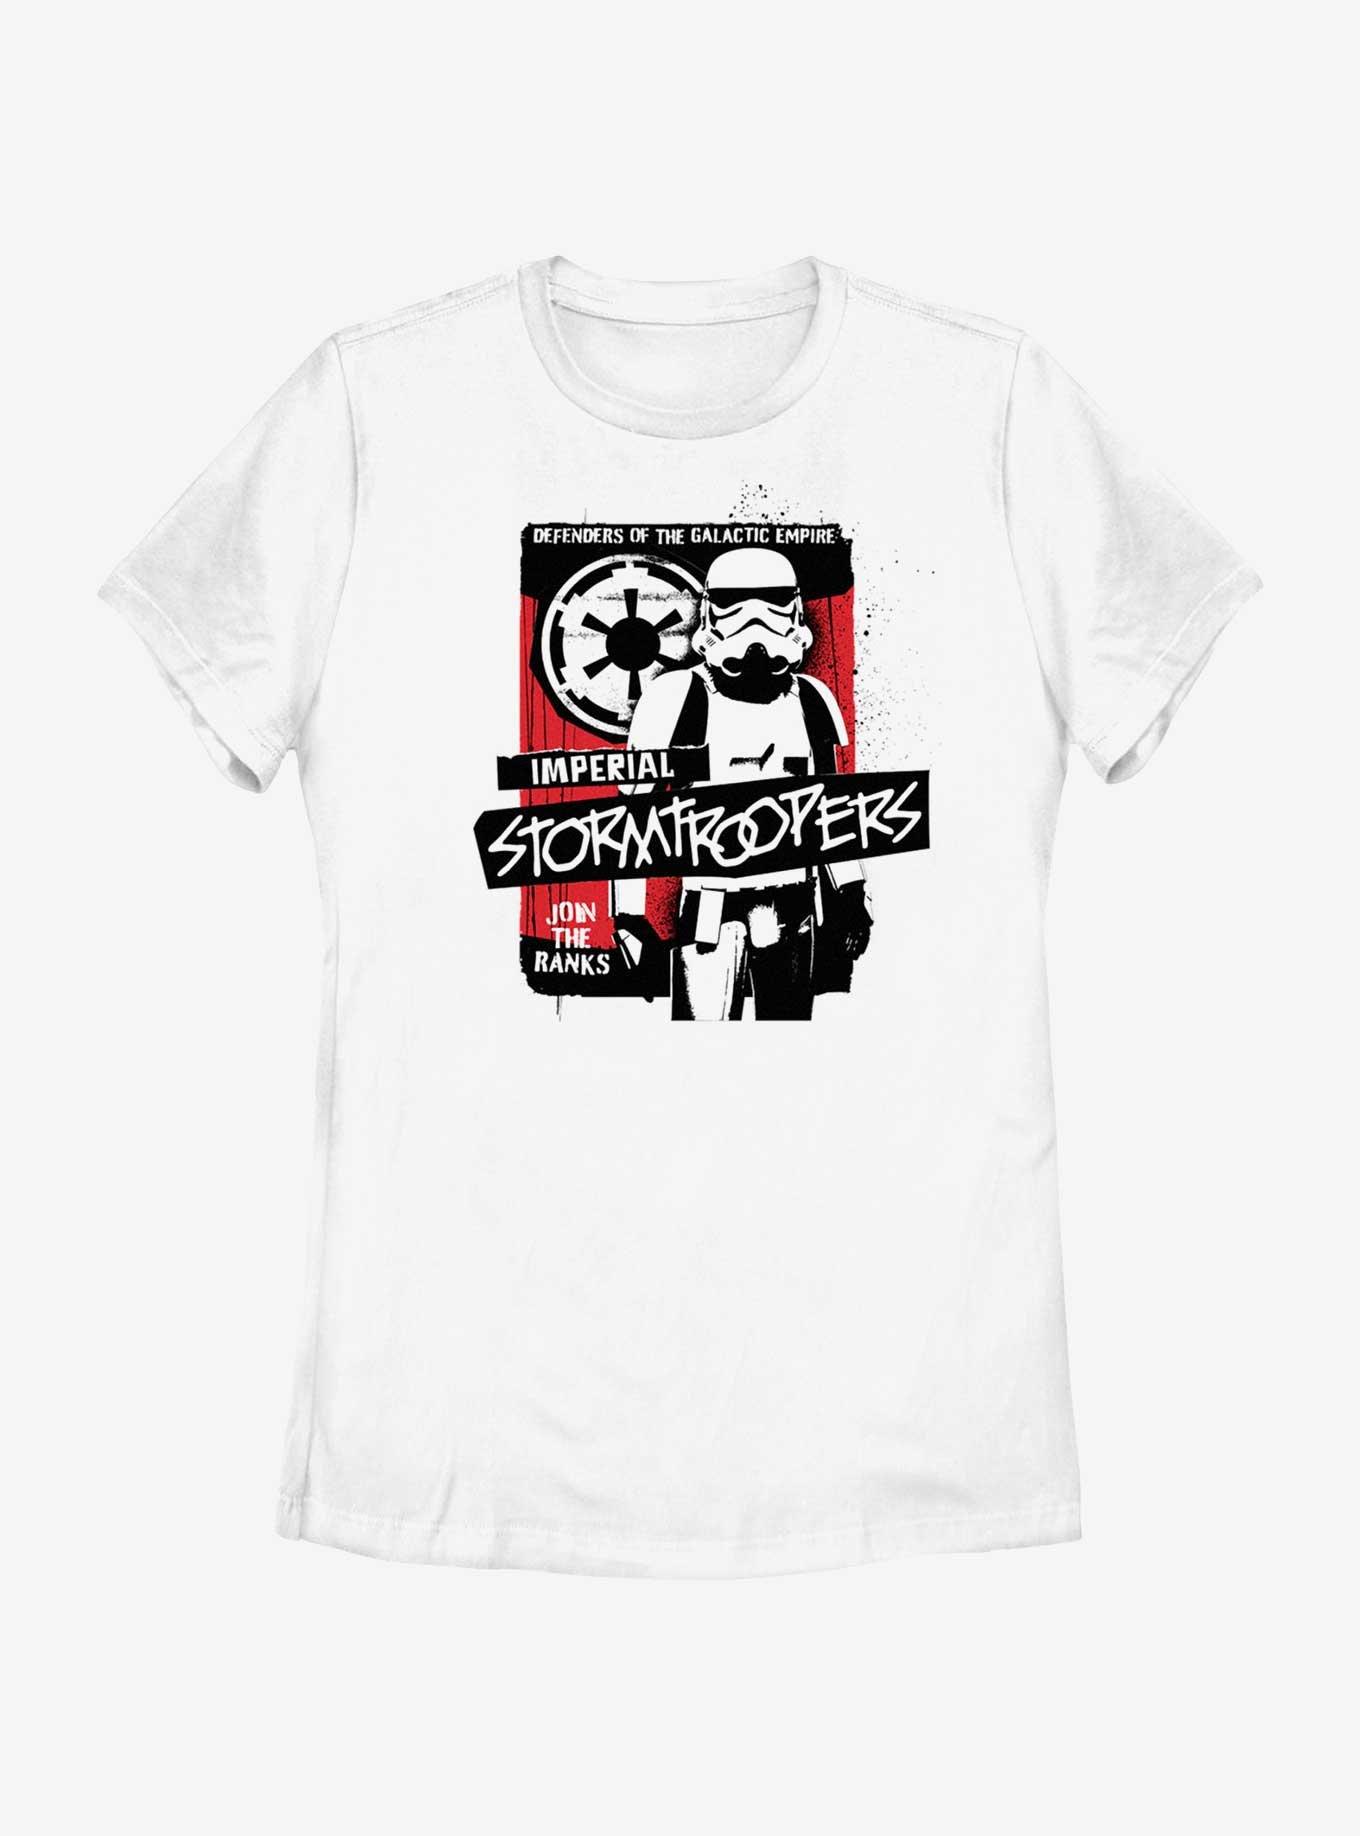 Star Wars Imperial Stormtroopers Graffiti Womens T-Shirt, WHITE, hi-res